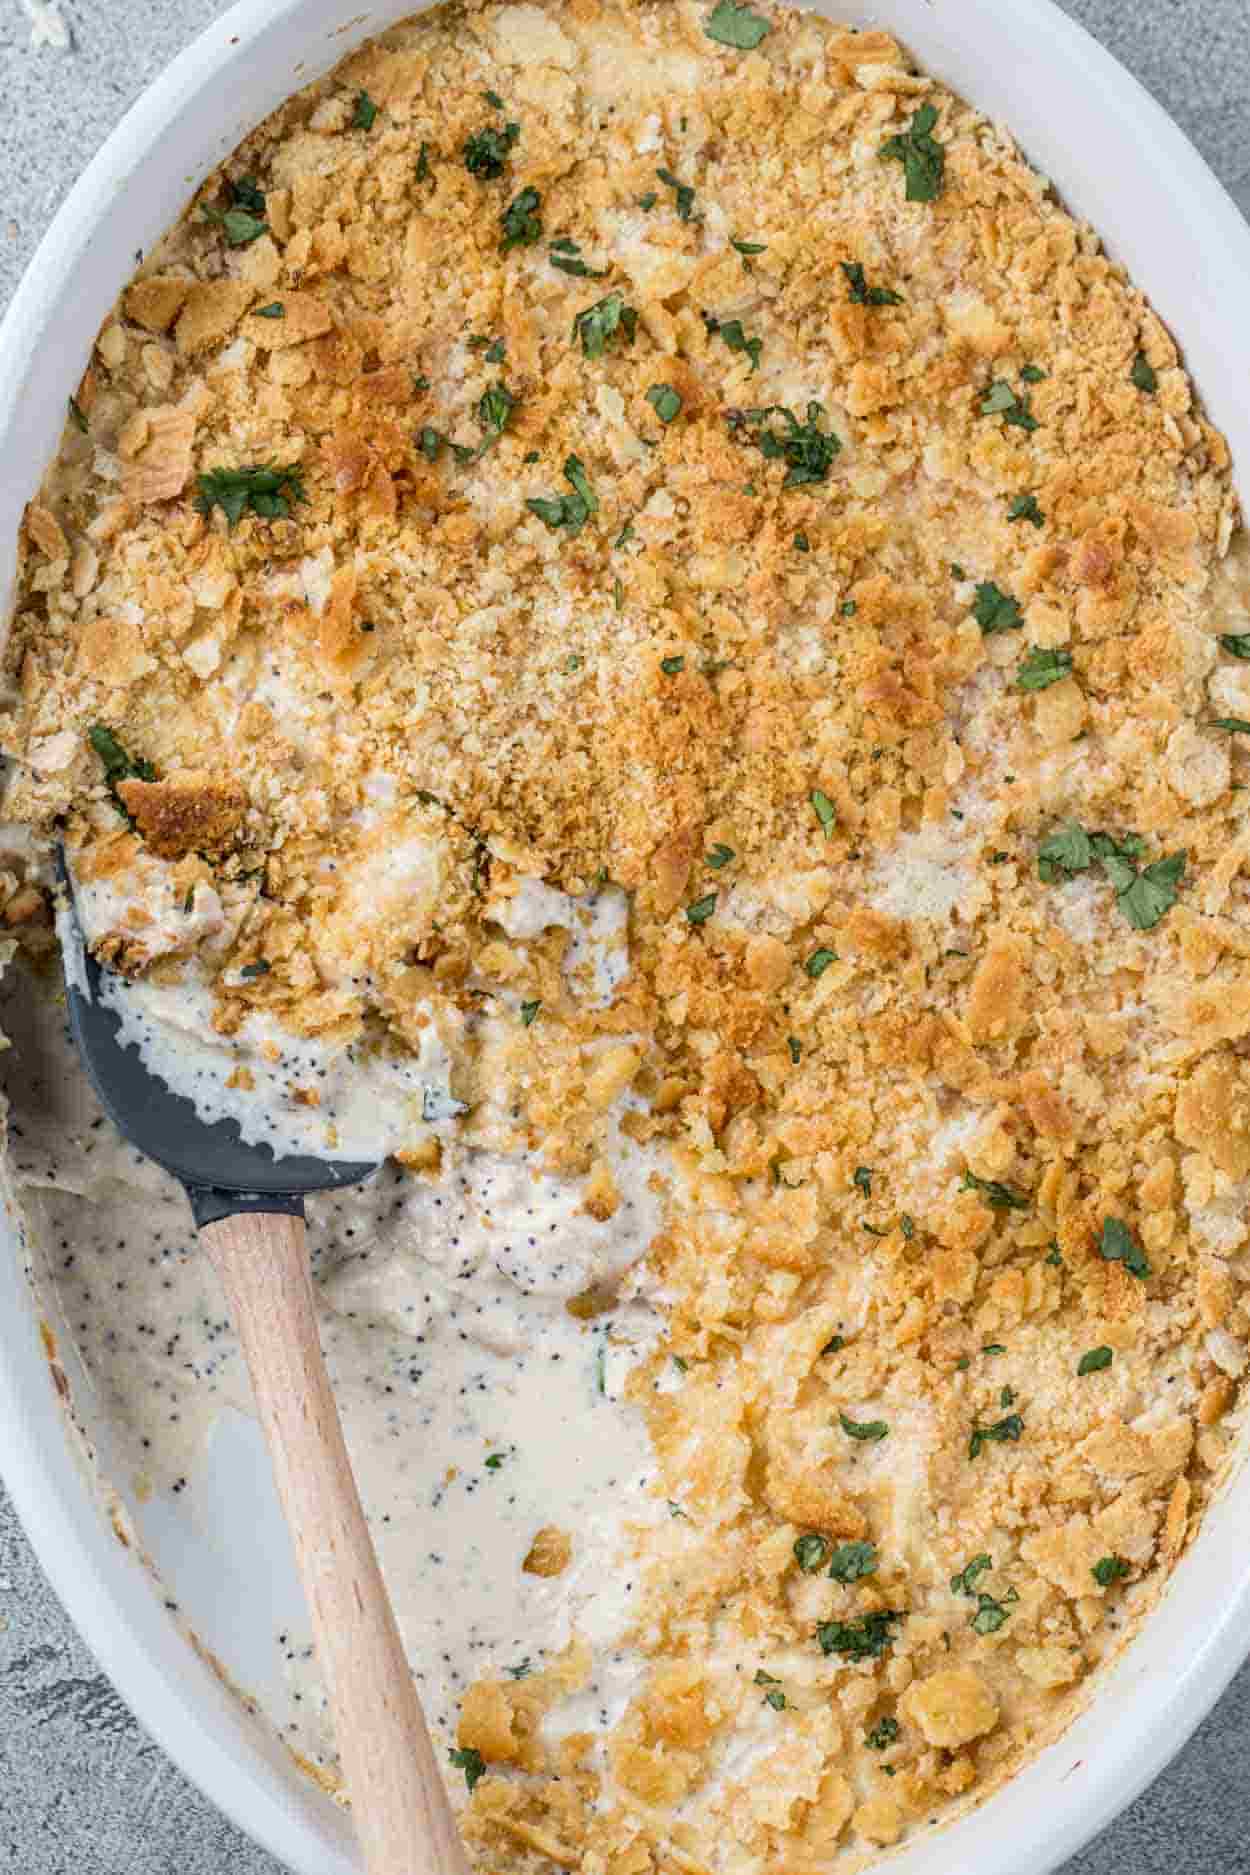 Poppy seed chicken in a casserole dish with a spatula, topped with greens.